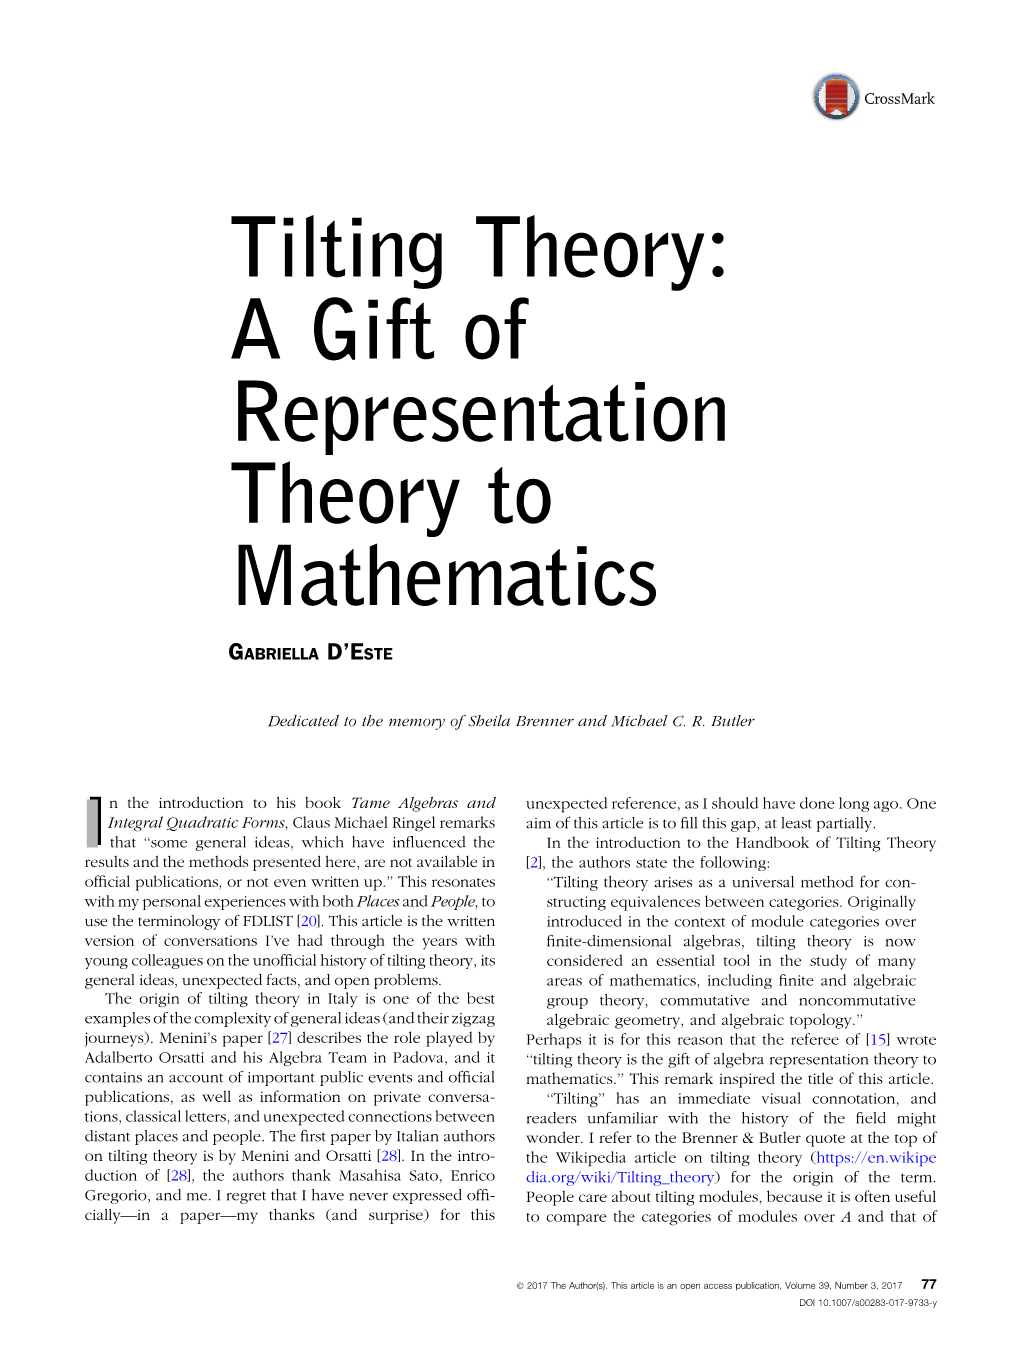 Tilting Theory: a Gift of Representation Theory to Mathematics